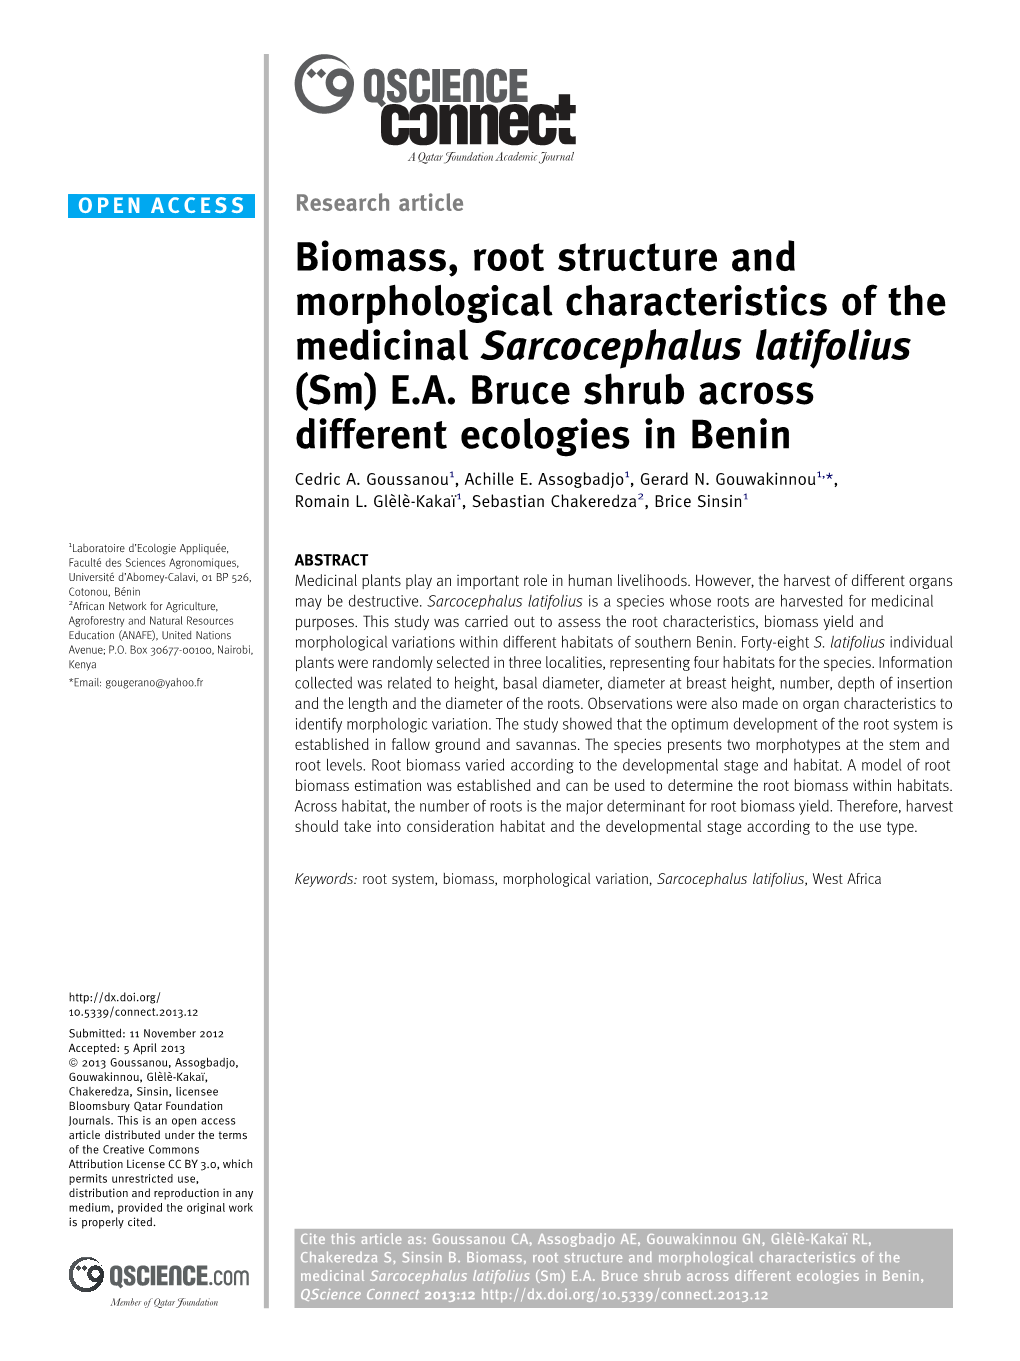 Biomass, Root Structure and Morphological Characteristics of the Medicinal Sarcocephalus Latifolius (Sm) E.A